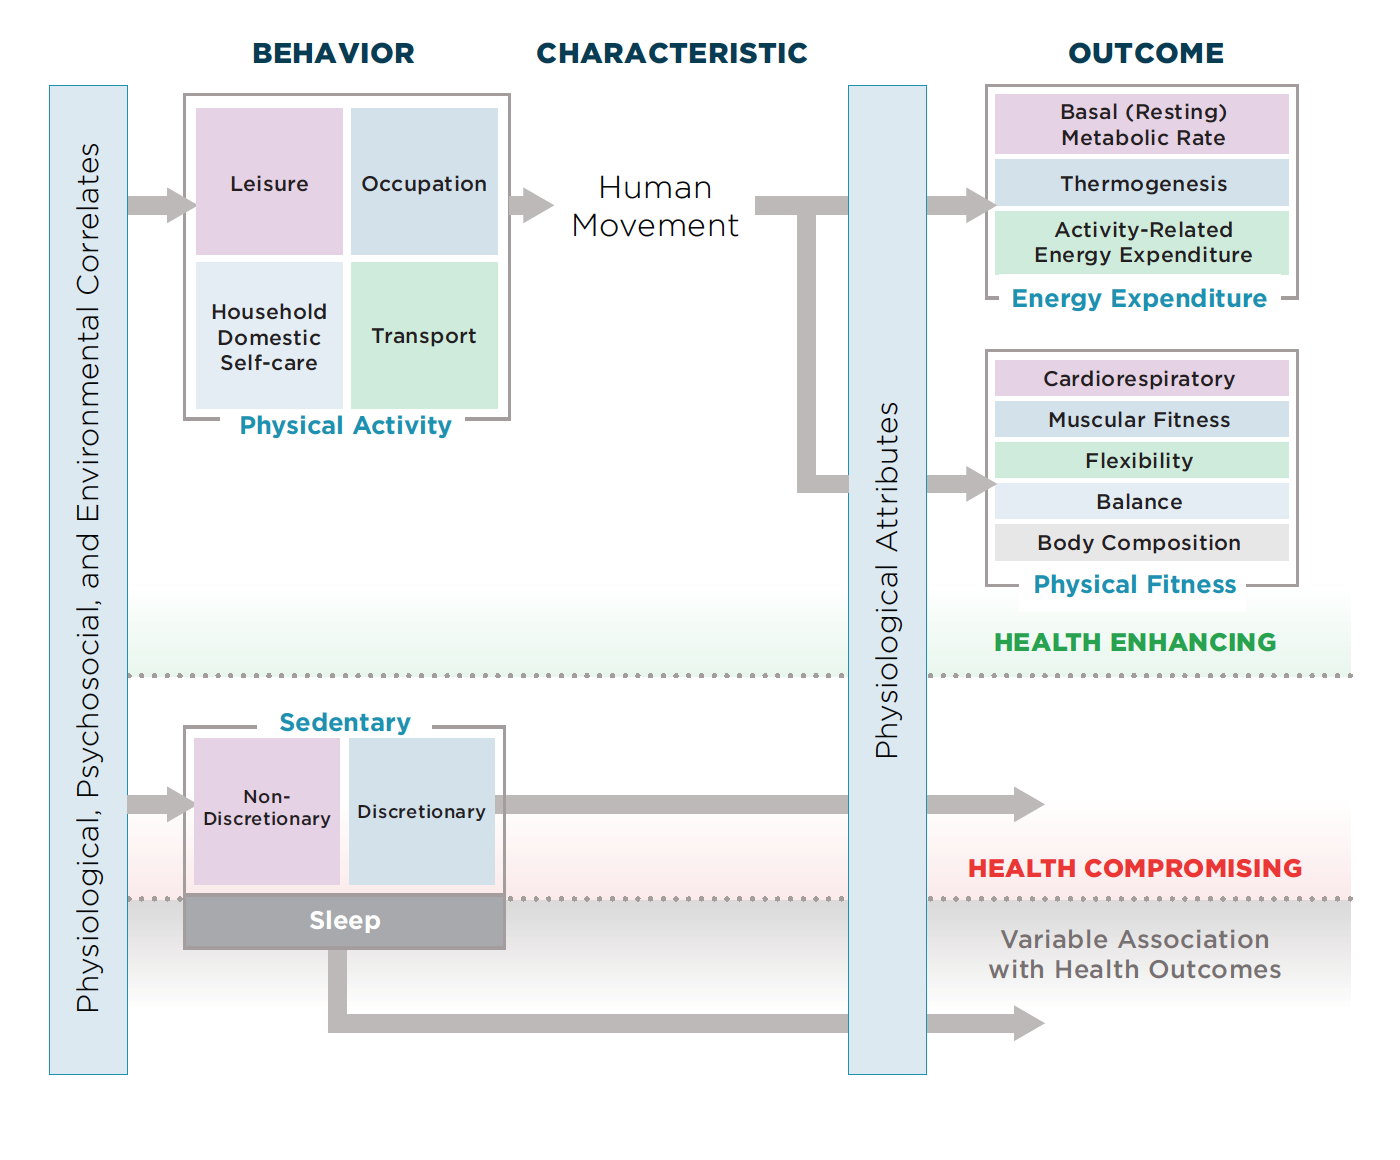 Figure 3: A Model of Sedentary and Physical Activity Behaviors